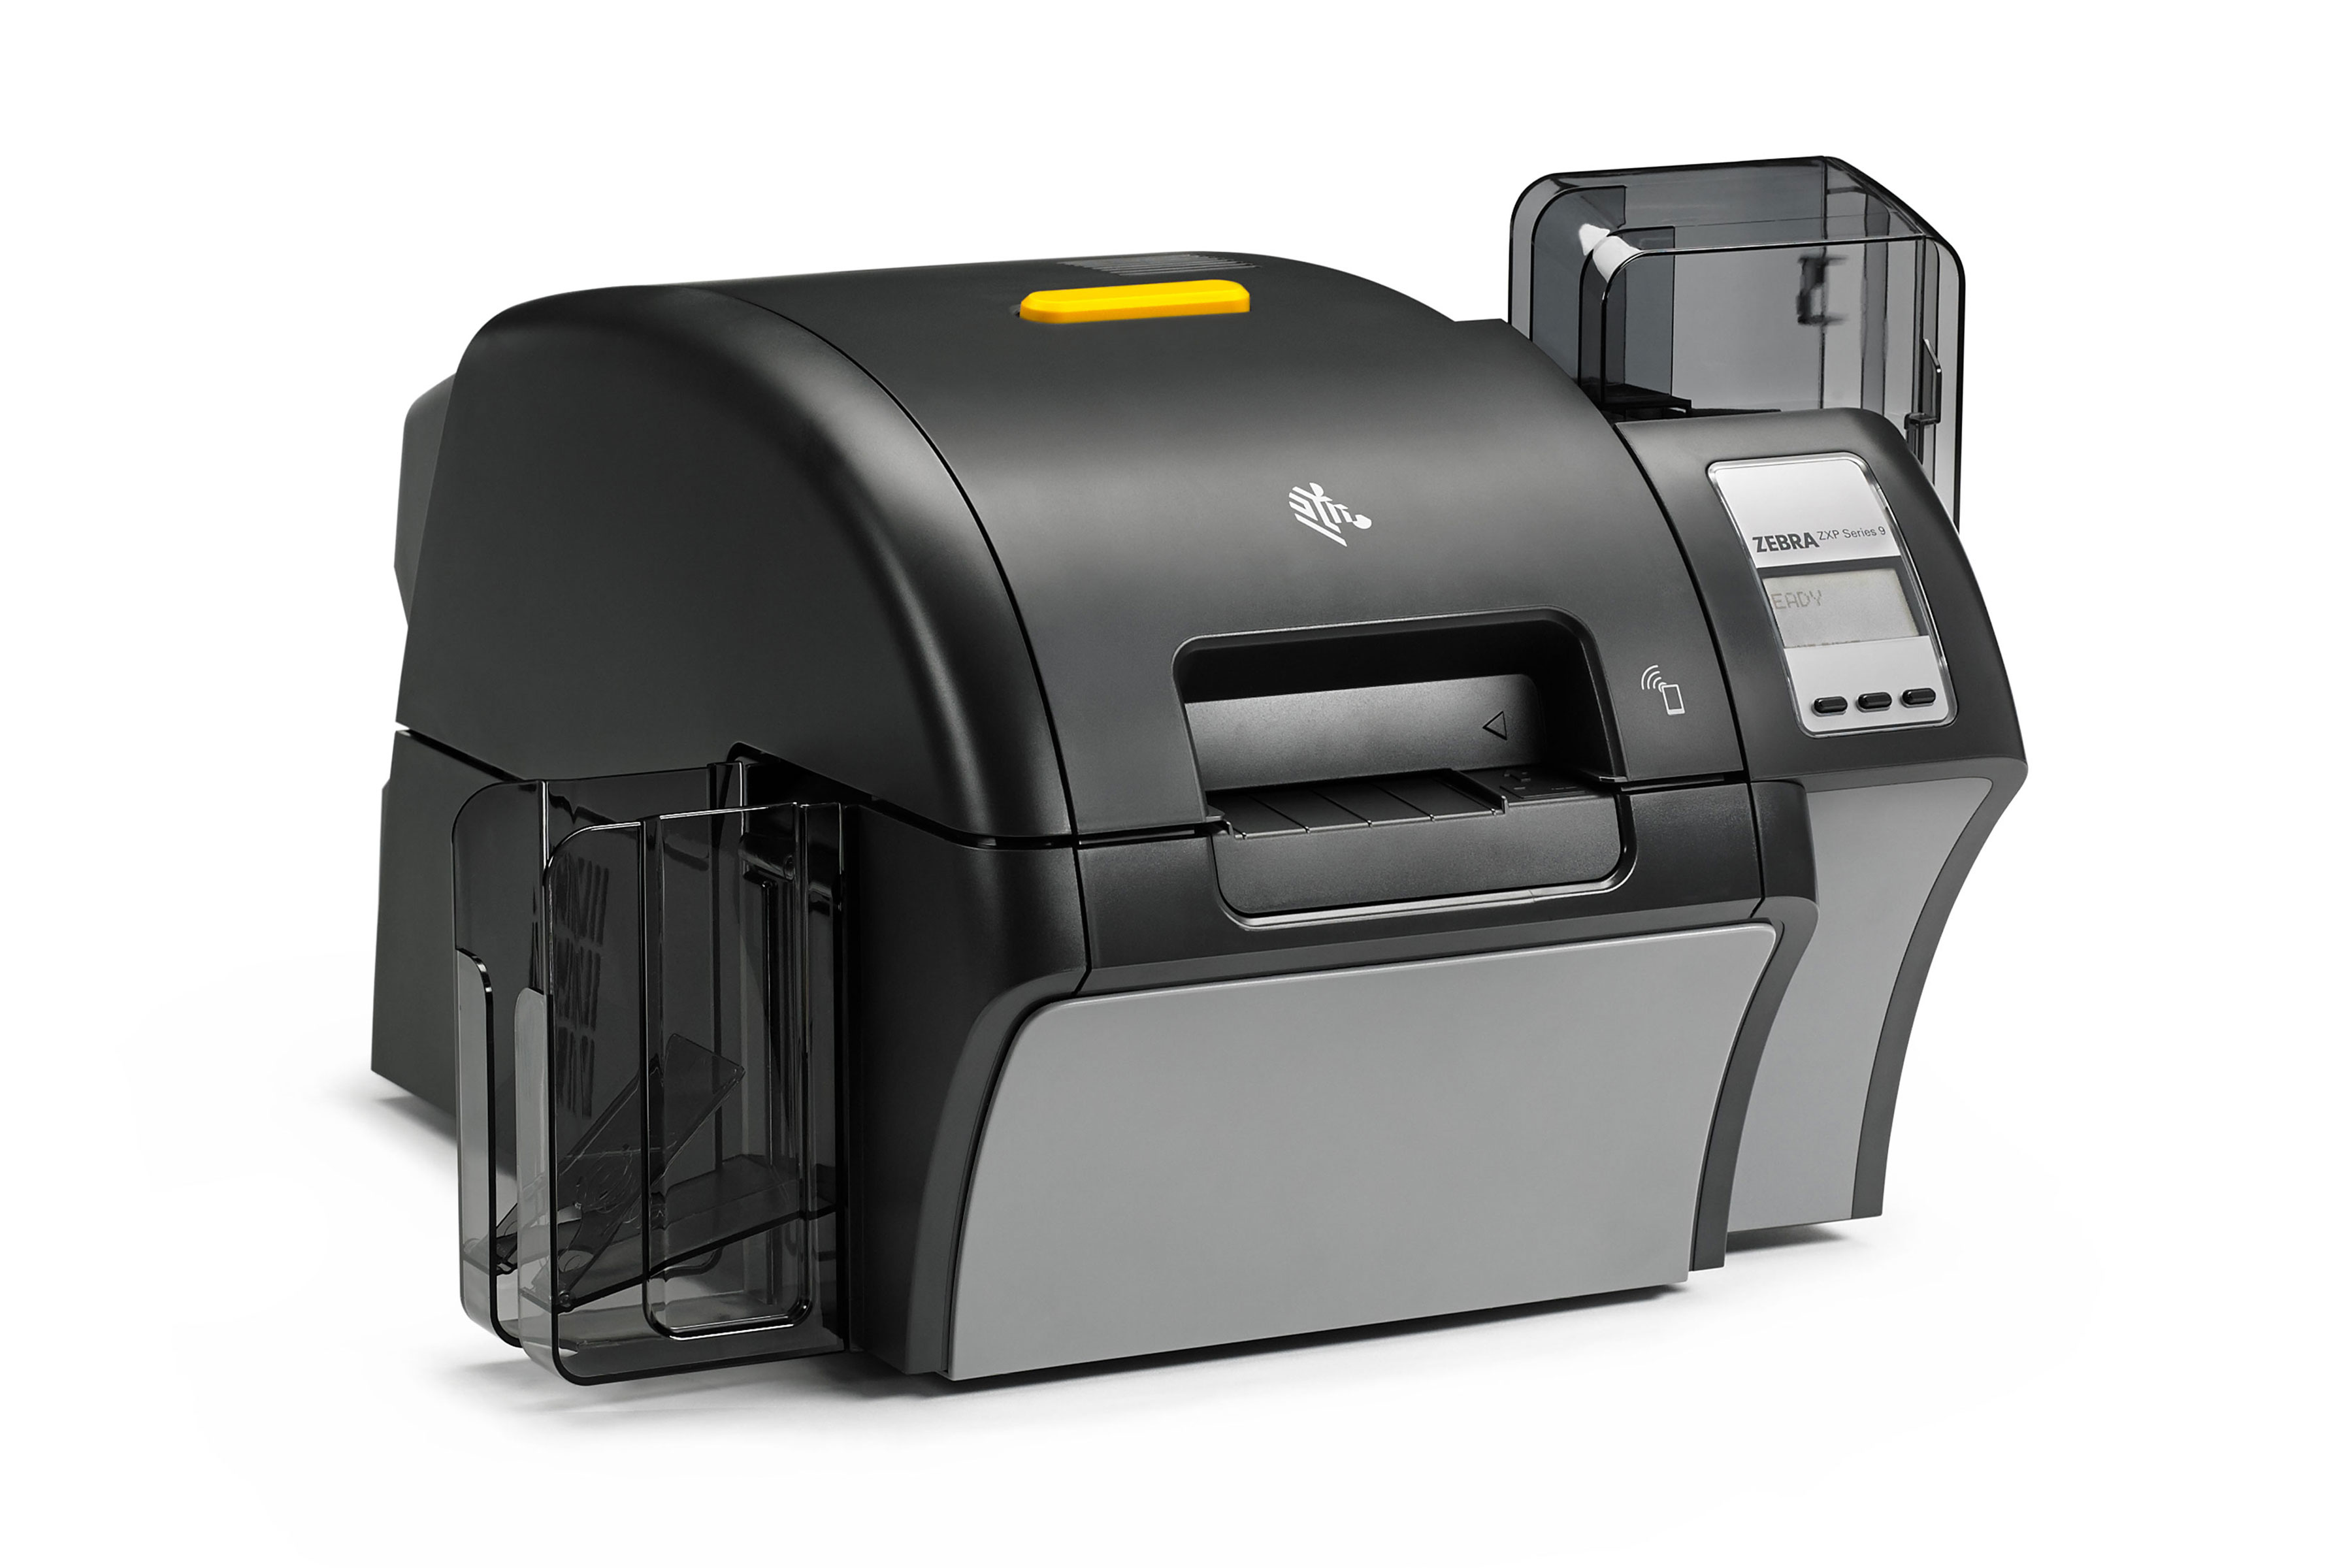 Front right view of a Zebra ZXP 9 ID card printer